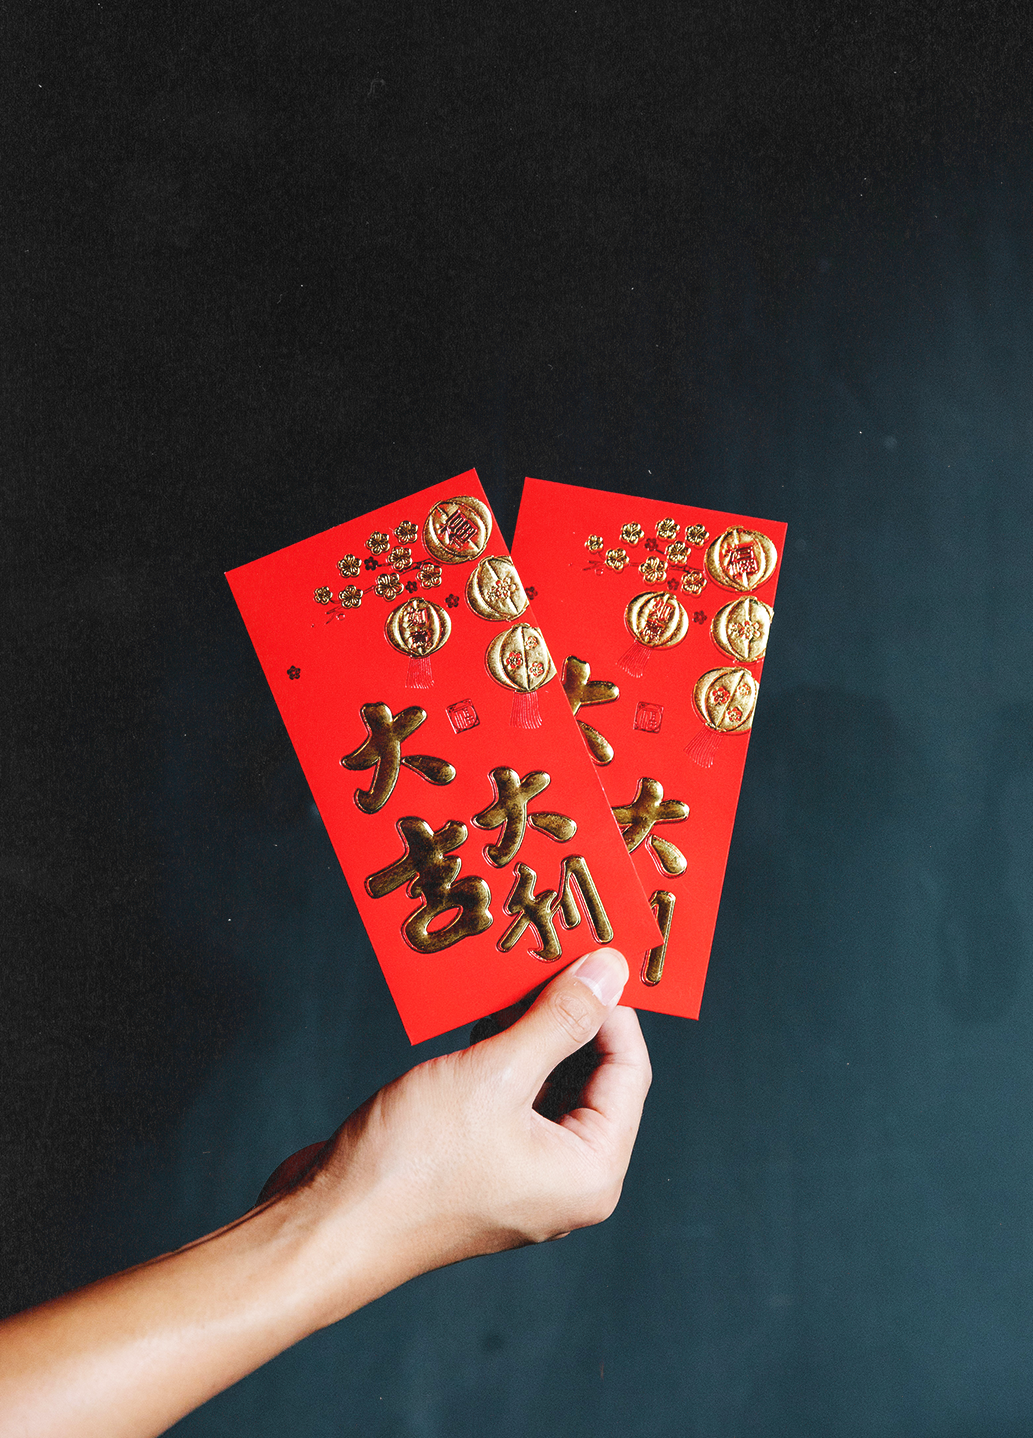 CNY 2022: The prettiest ang baos money can't buy